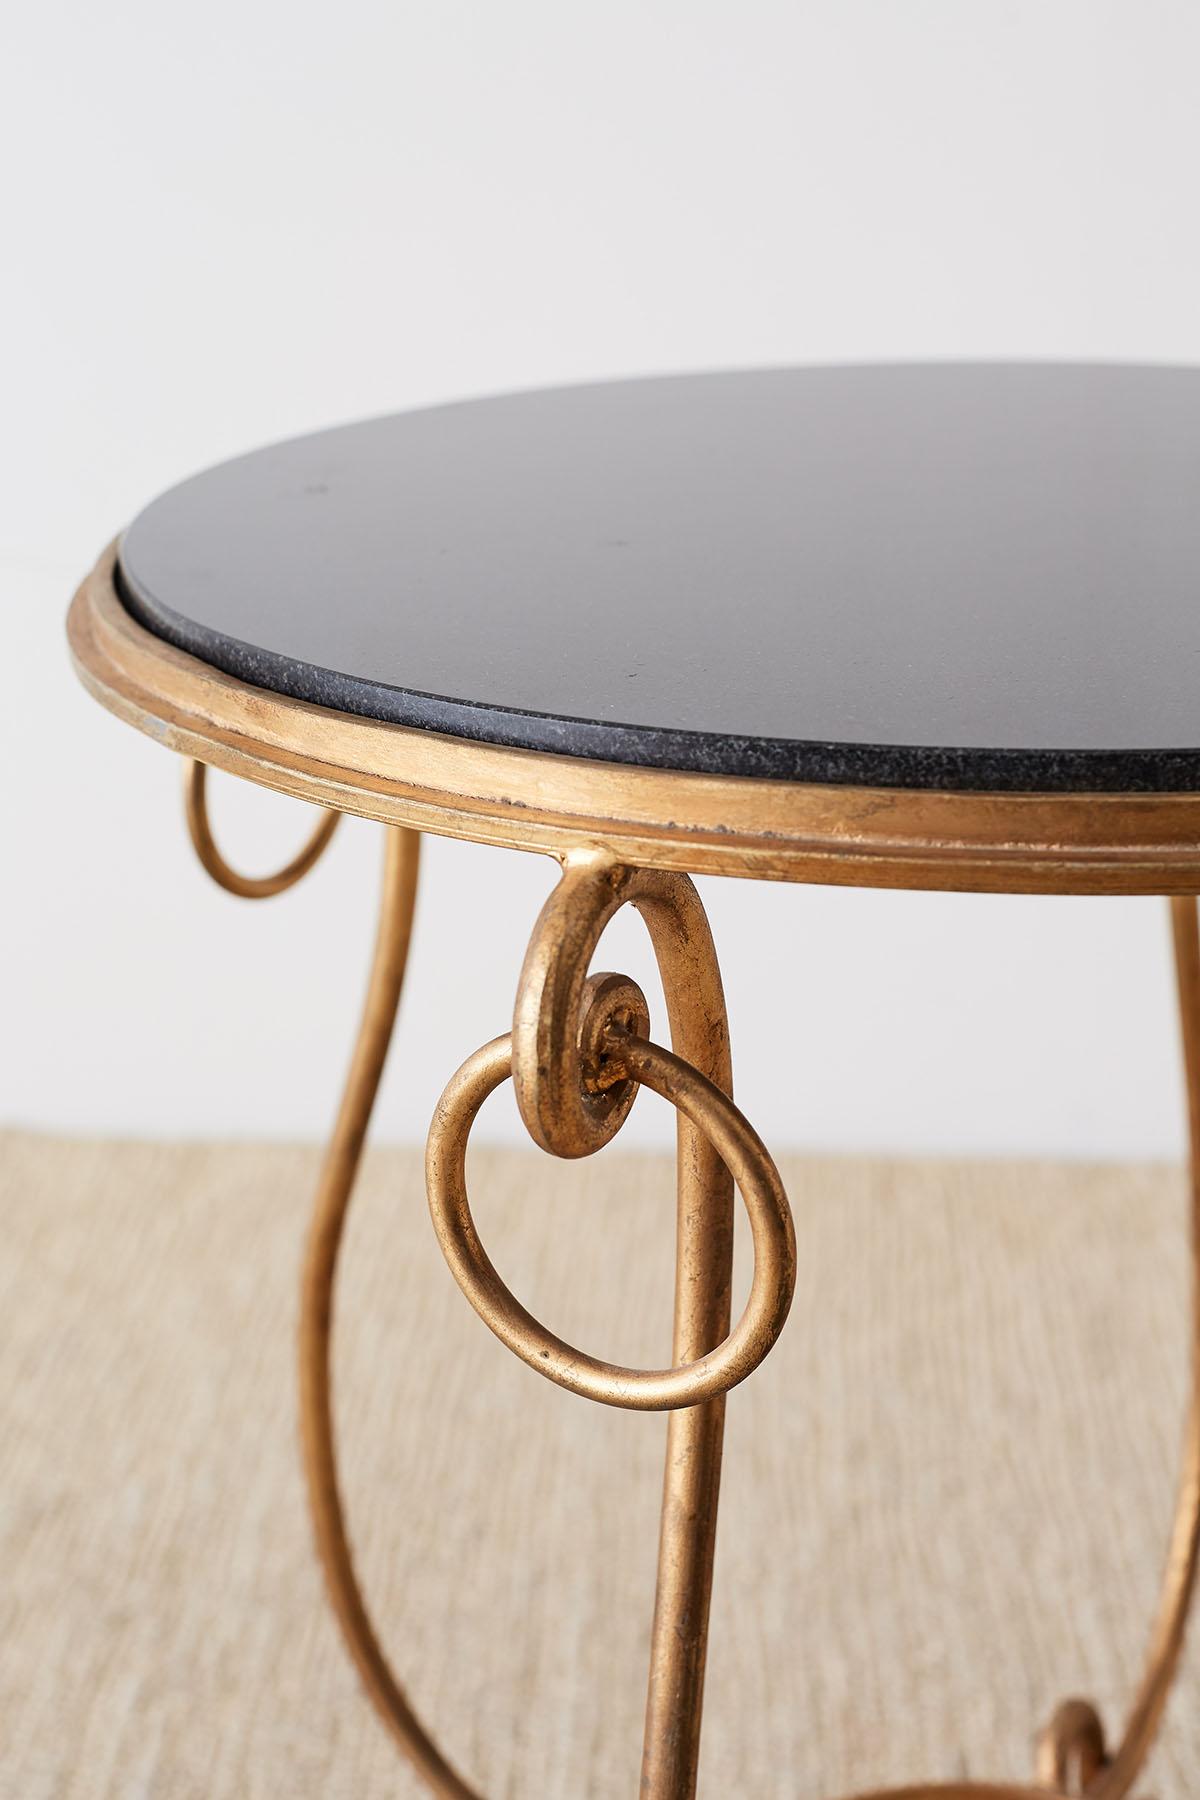 Hand-Crafted Rene Drouet Style Gilded Iron and Granite Table For Sale